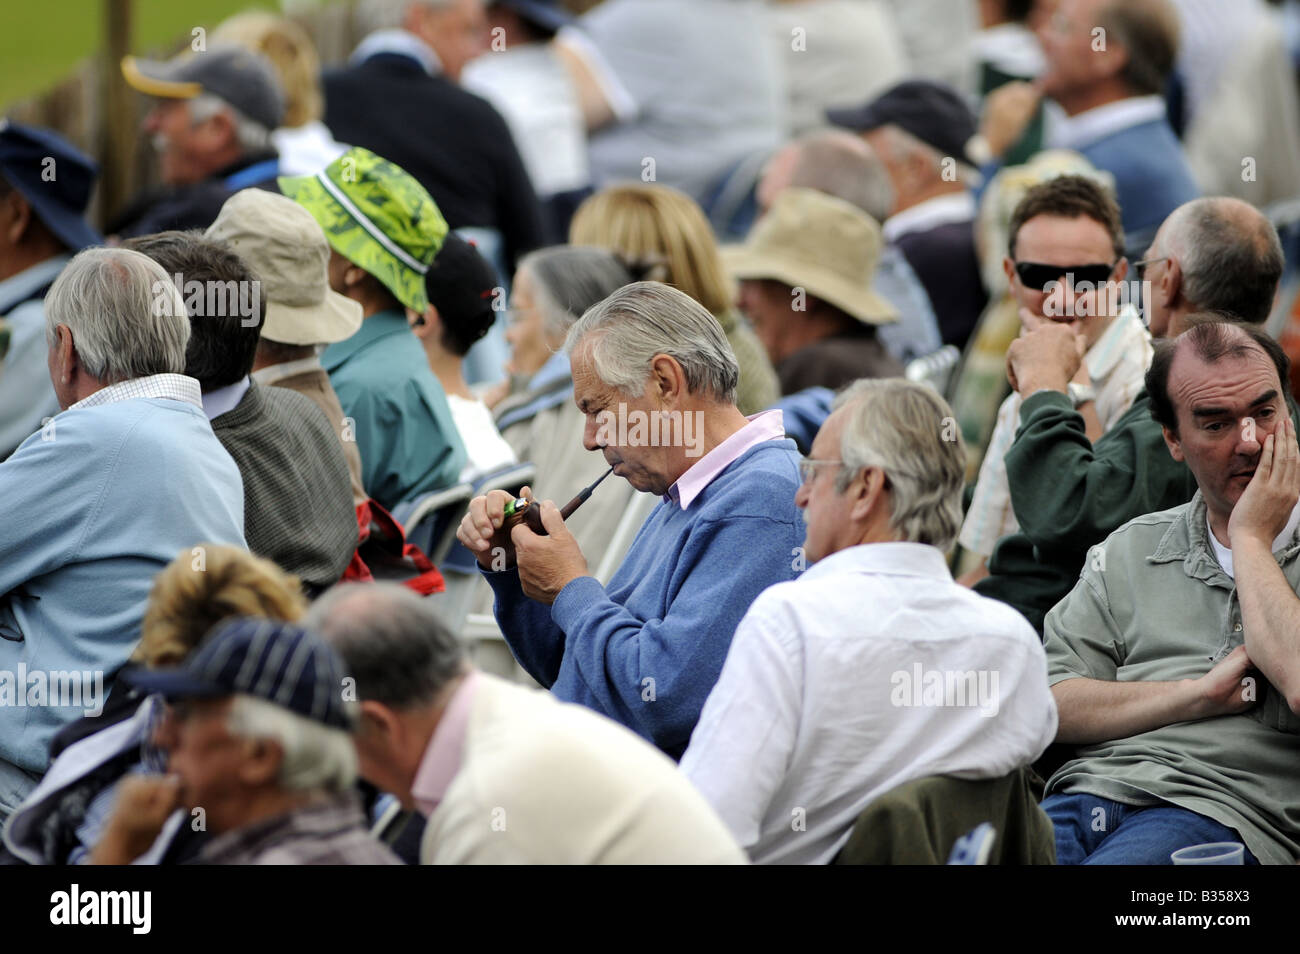 A man lights a pipe amongst a crowd watching cricket at the picturesque Arundel ground in Sussex UK Stock Photo